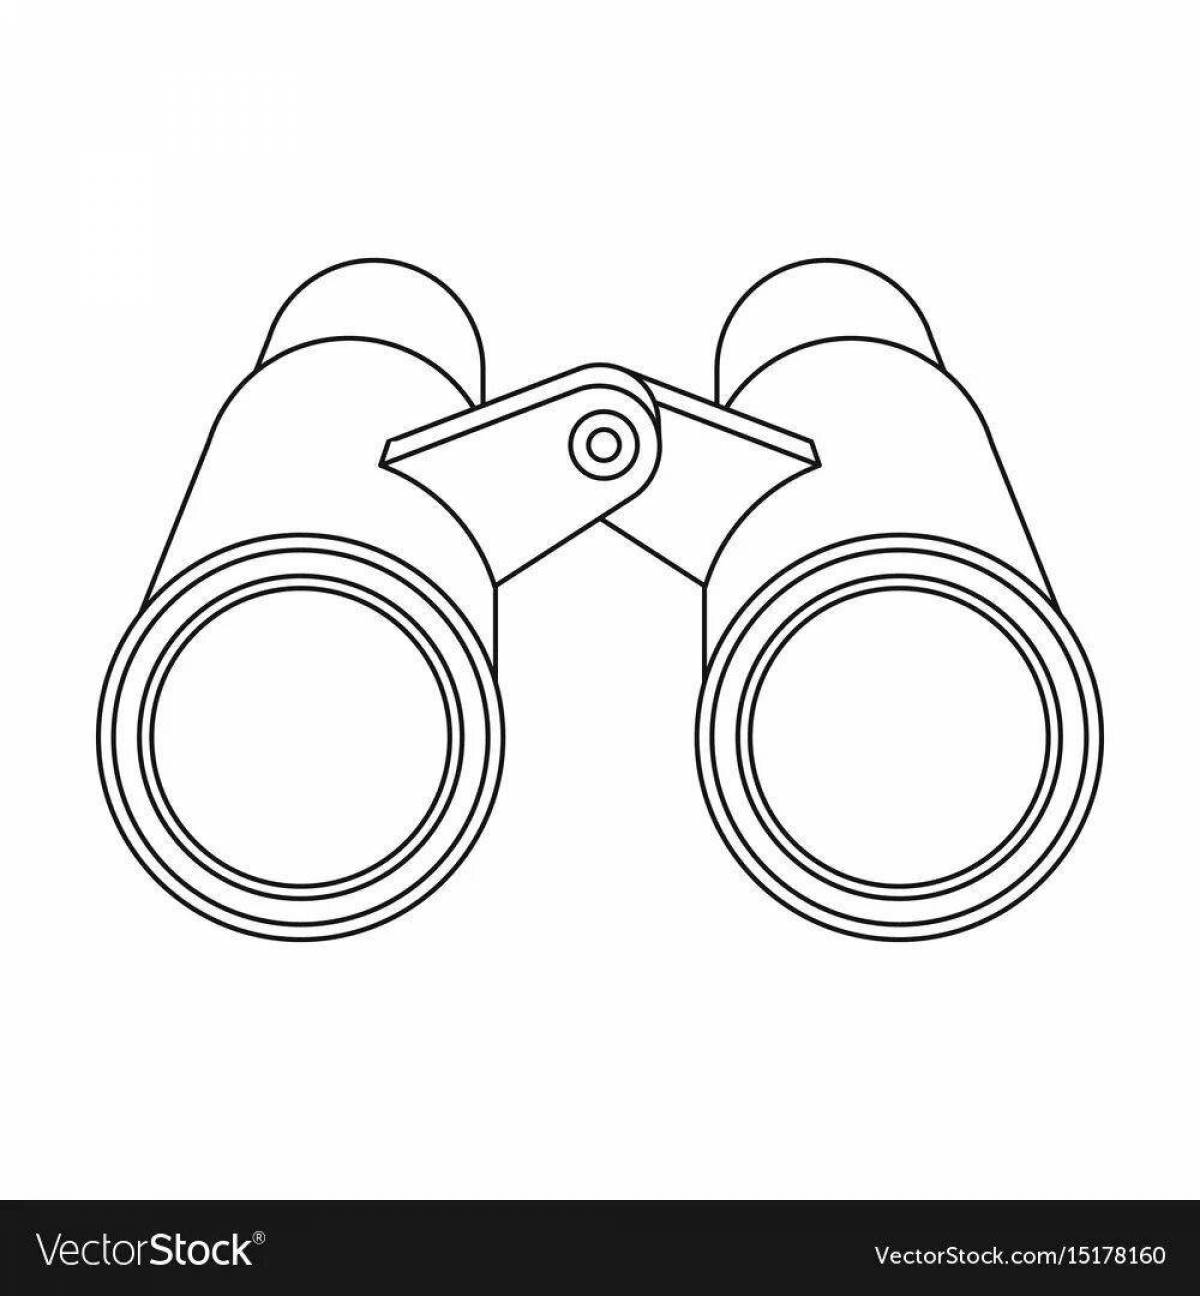 Attractive binoculars coloring page